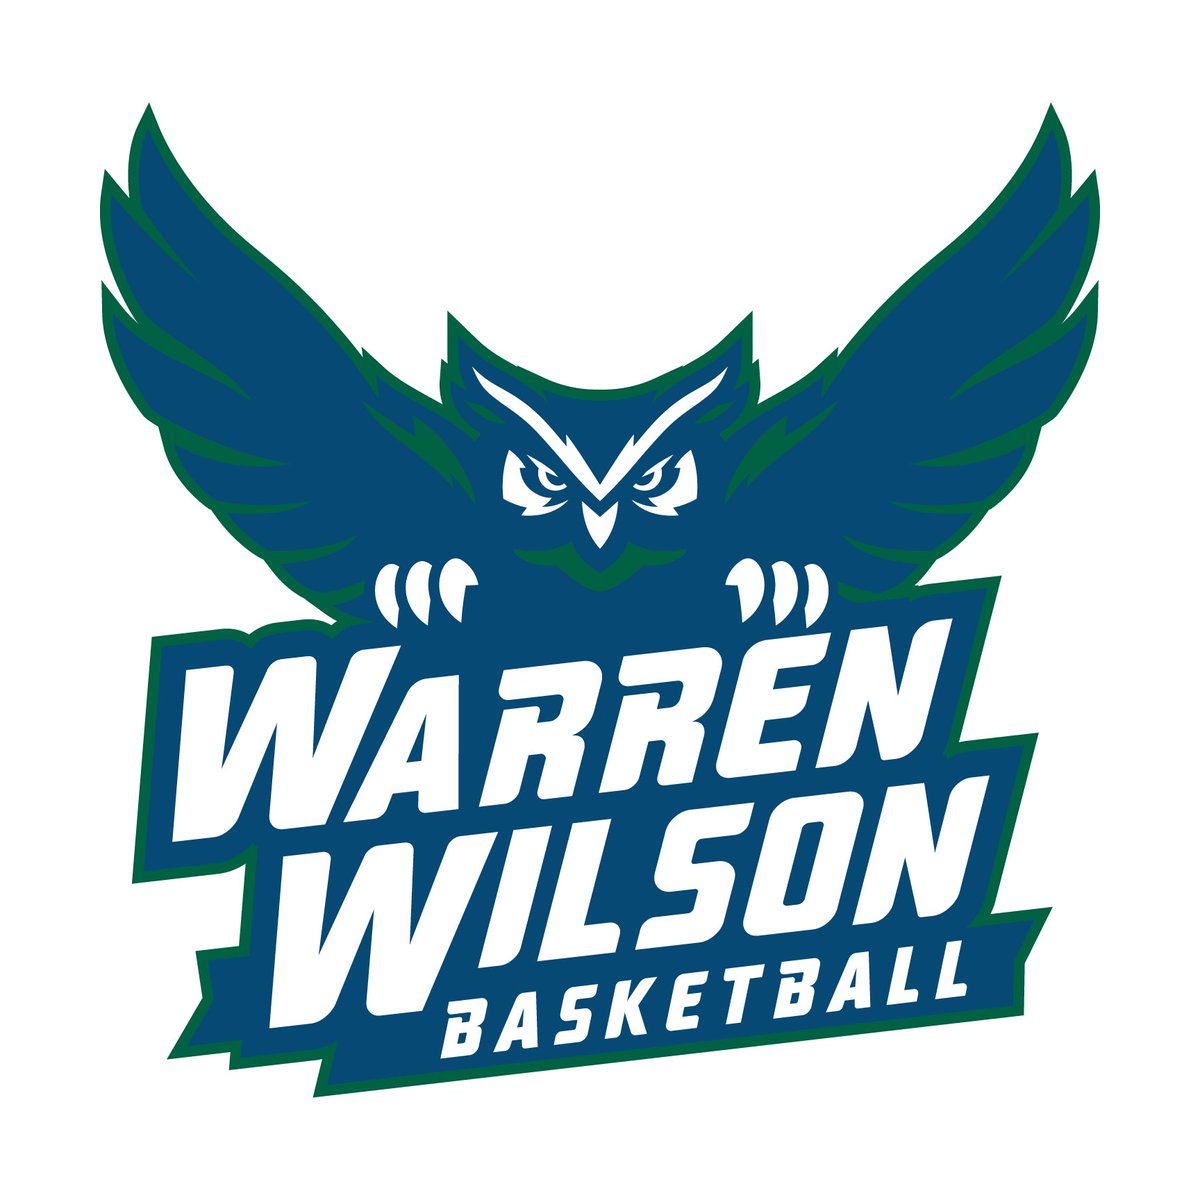 NCAA Division 3 Warren Wilson College here and we are still looking to add players. We are looking for 2024 class and JUCO transfers. DROP YOUR FILM! Requirements: •Have a 3.0+ GPA •Be able to pay tuition after aid (D3 does not offer athletic scholarships)